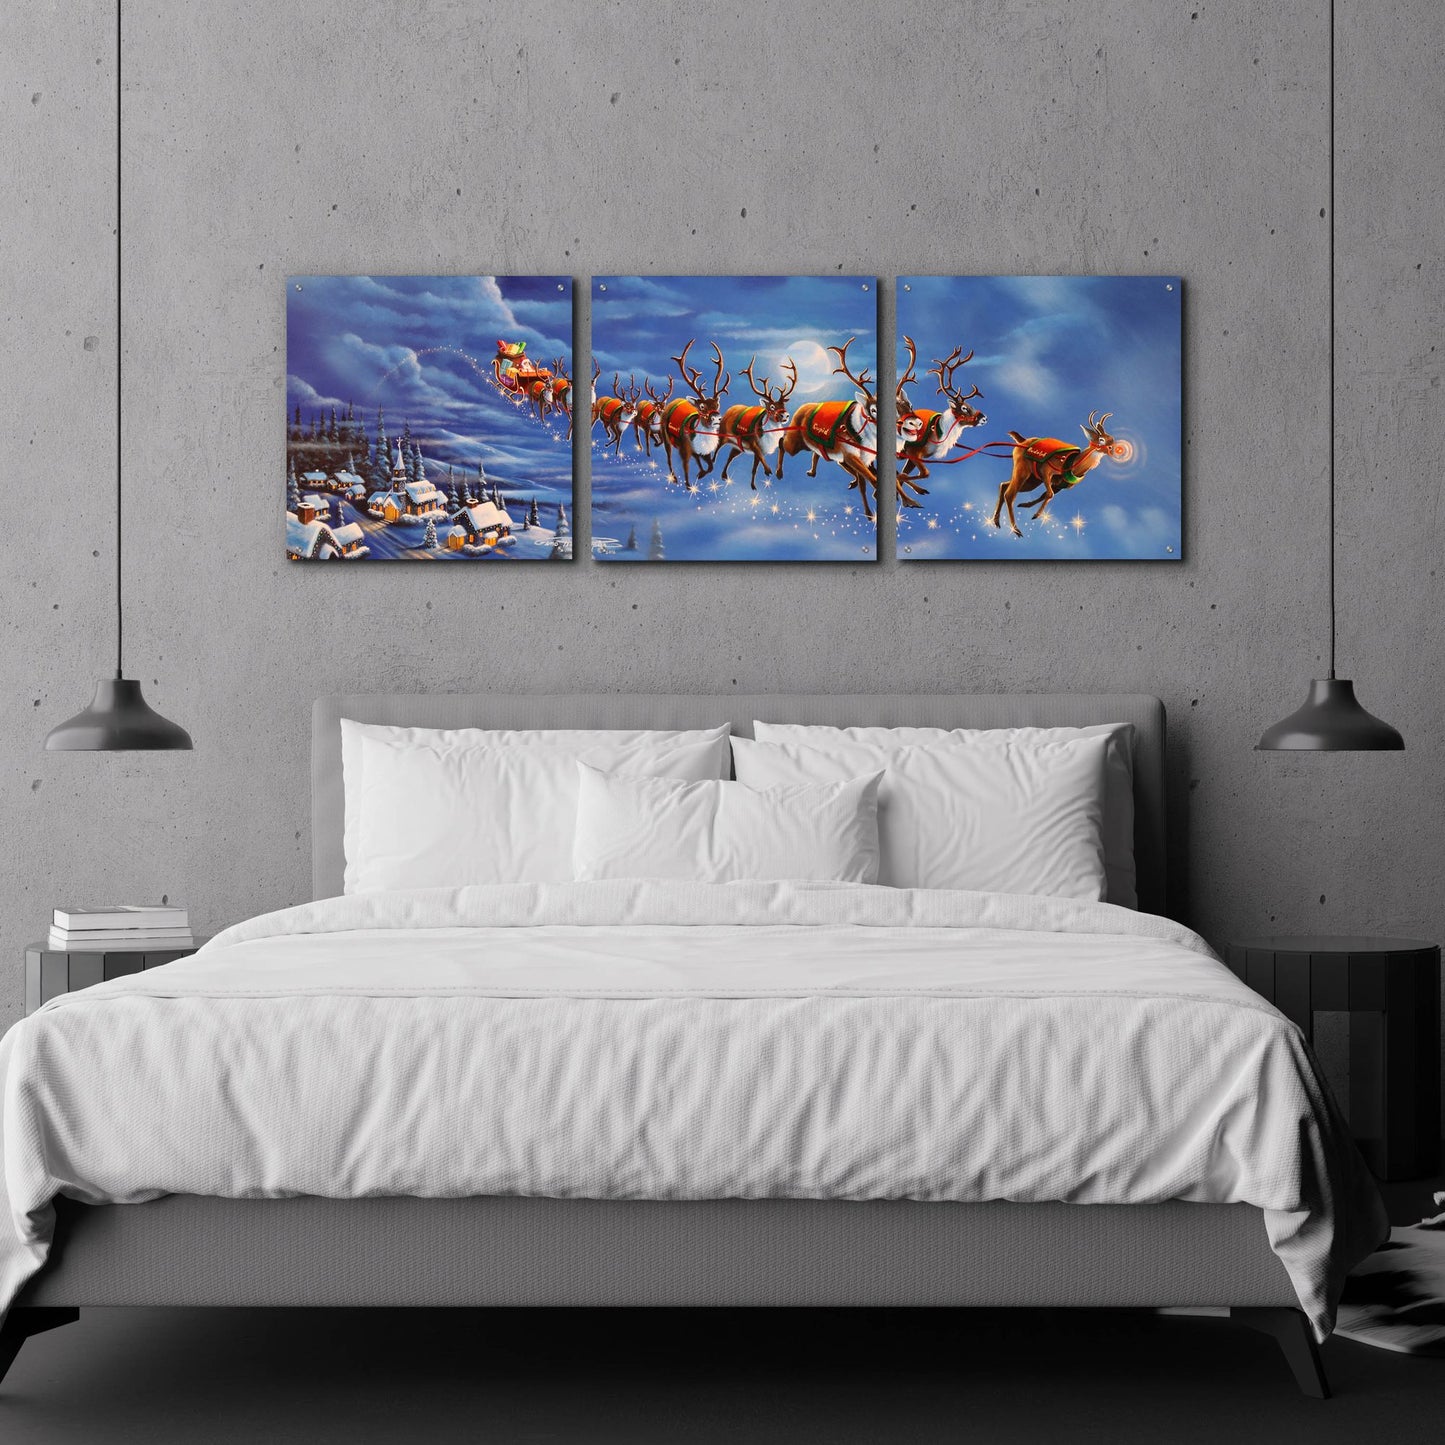 Epic Art 'Twas The Night Before Christmas' by Geno Peoples, Acrylic Glass Wall Art, 3 Piece Set,72x24